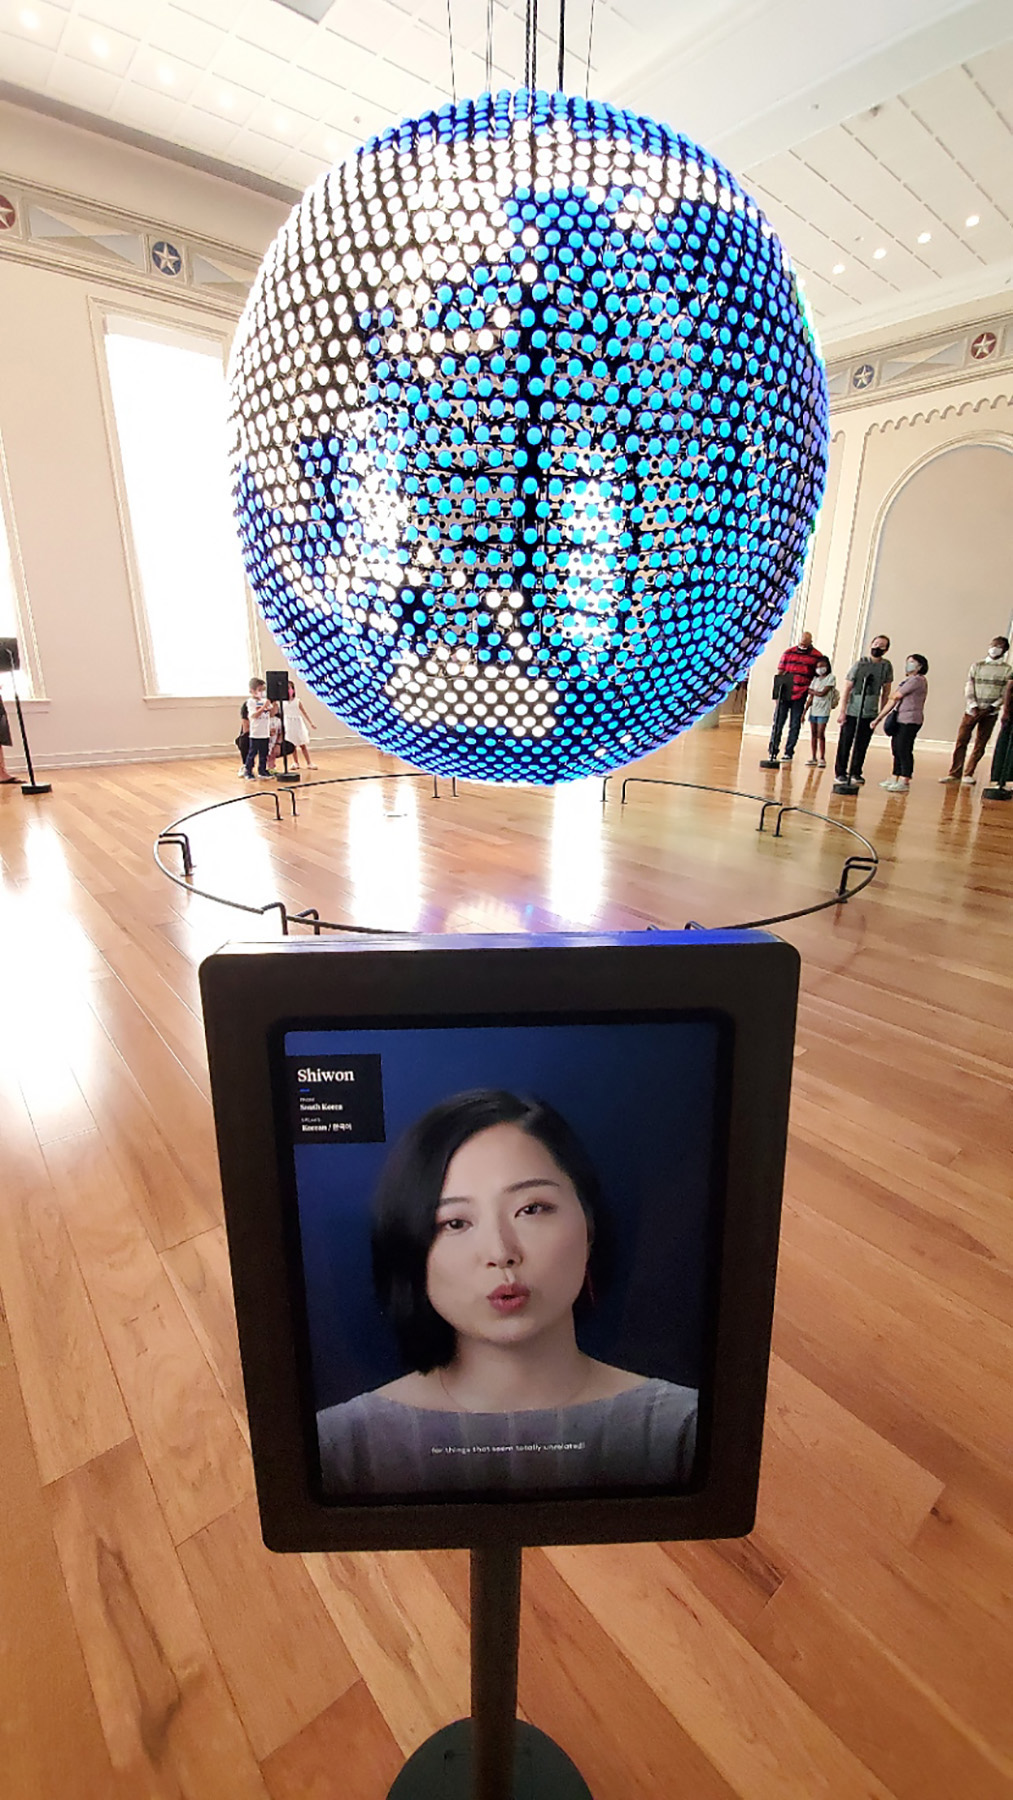 In the foreground of a bright, naturally lit room stands a touch screen with an image of a South Korean woman. She appears to be frozen mid sentence as her lips are pursed in an ooh shape. Behind the screen, suspended from the ceiling is a large globe composed of fist sized, circular LED lights which are colored to mimic the surface of the earth. This side of the globe is of Australia, Eastern Asia, and the Pacific Ocean.